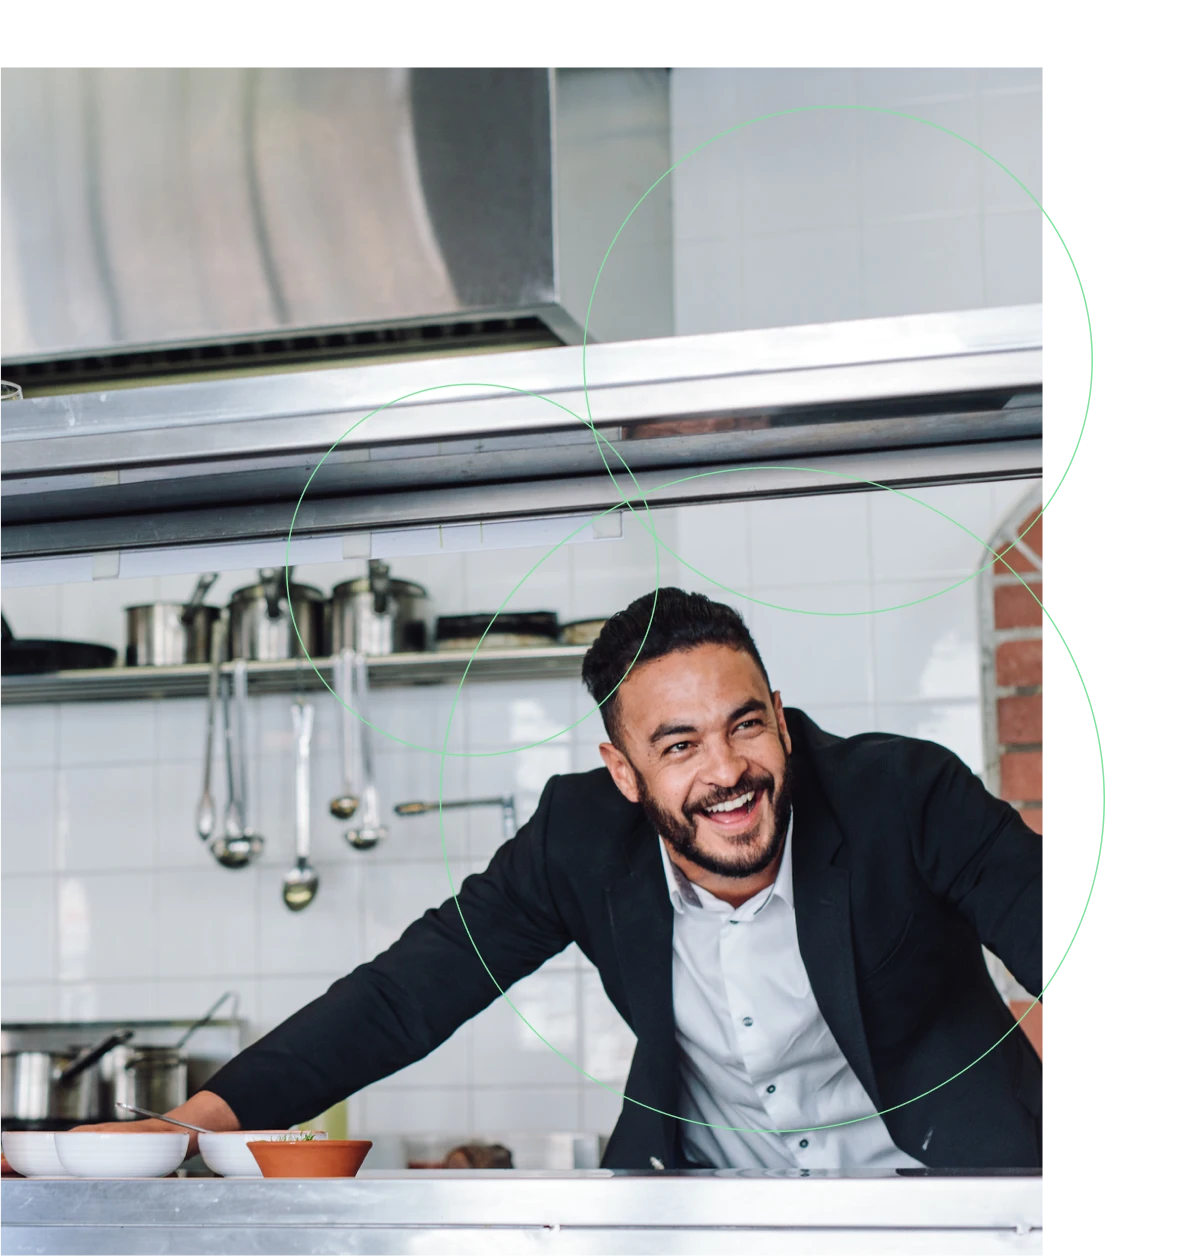 Man behind commercial kitchen counter leaning over smiling.